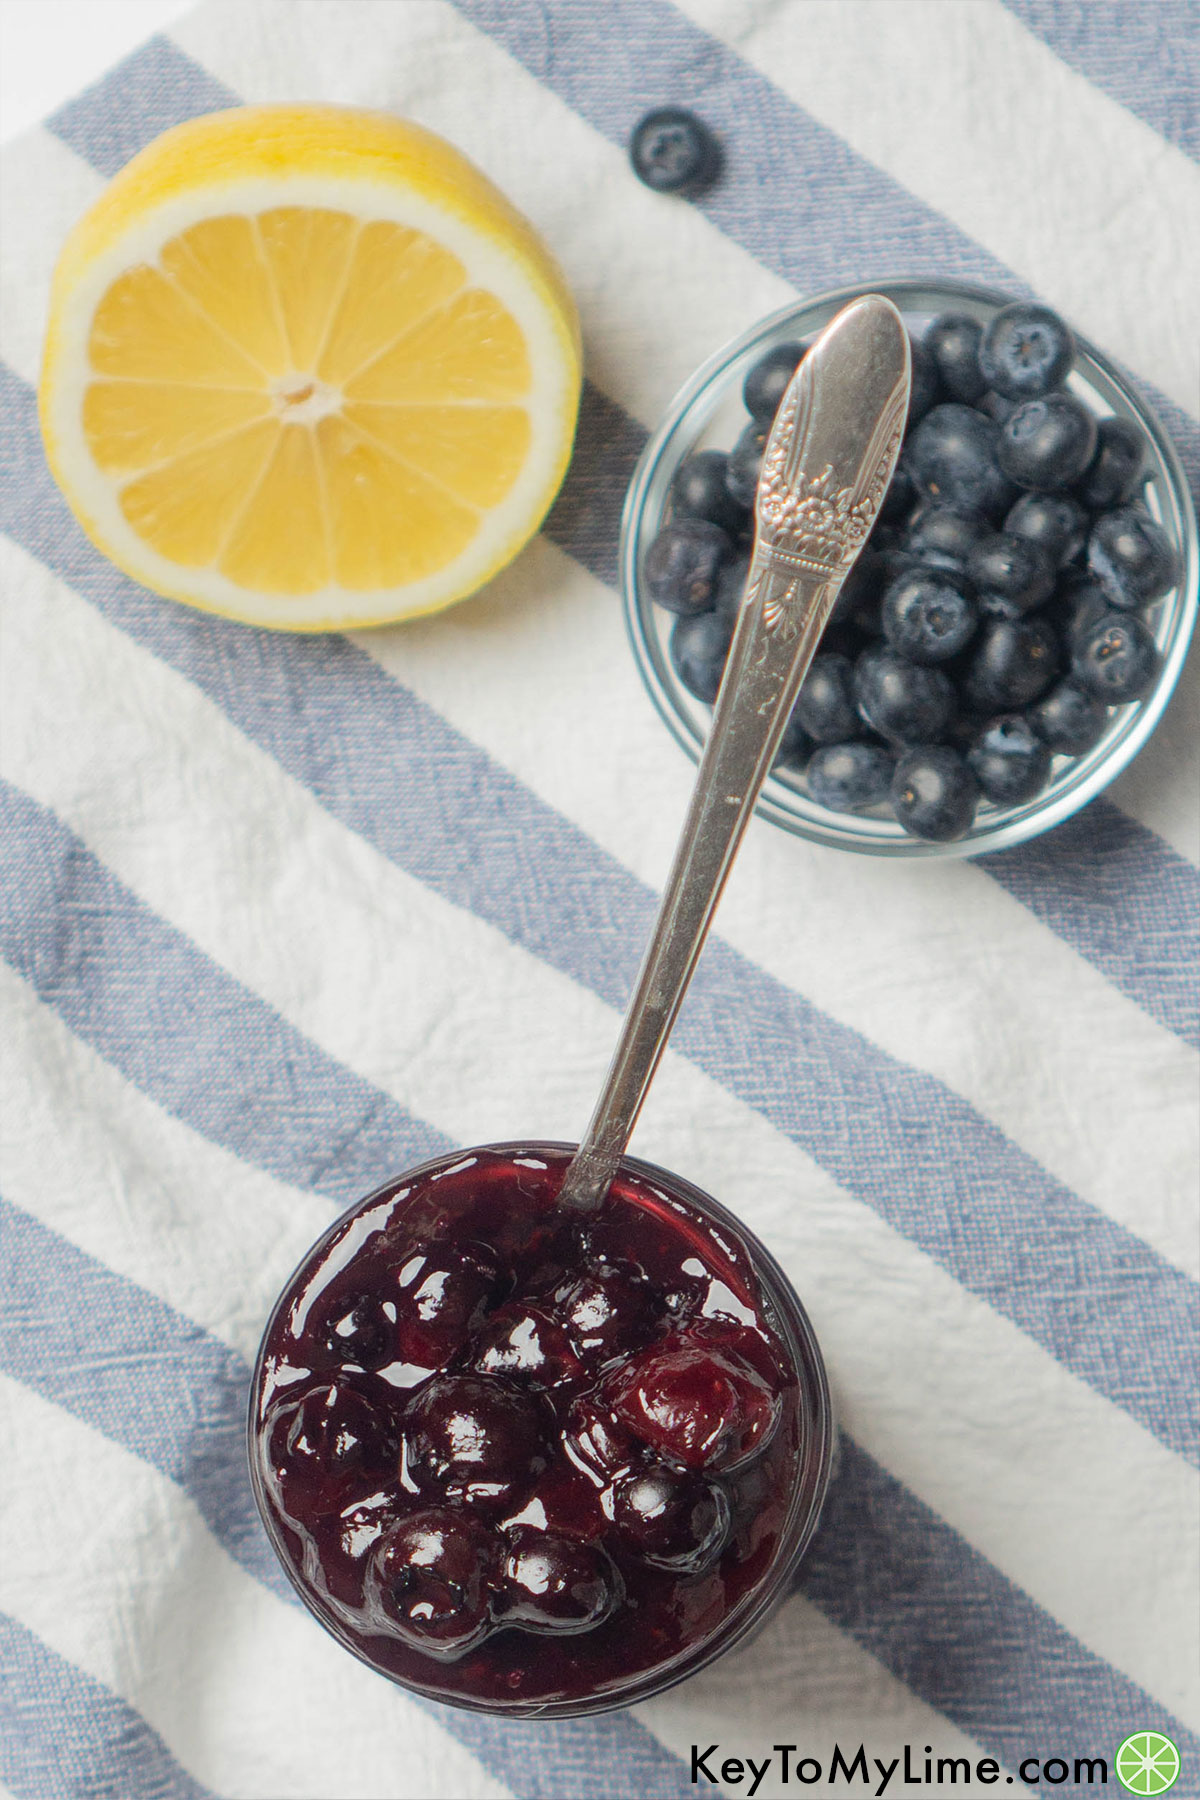 Delicious blueberry filling in a jar next to a small bowl of blueberries and half a lemon.